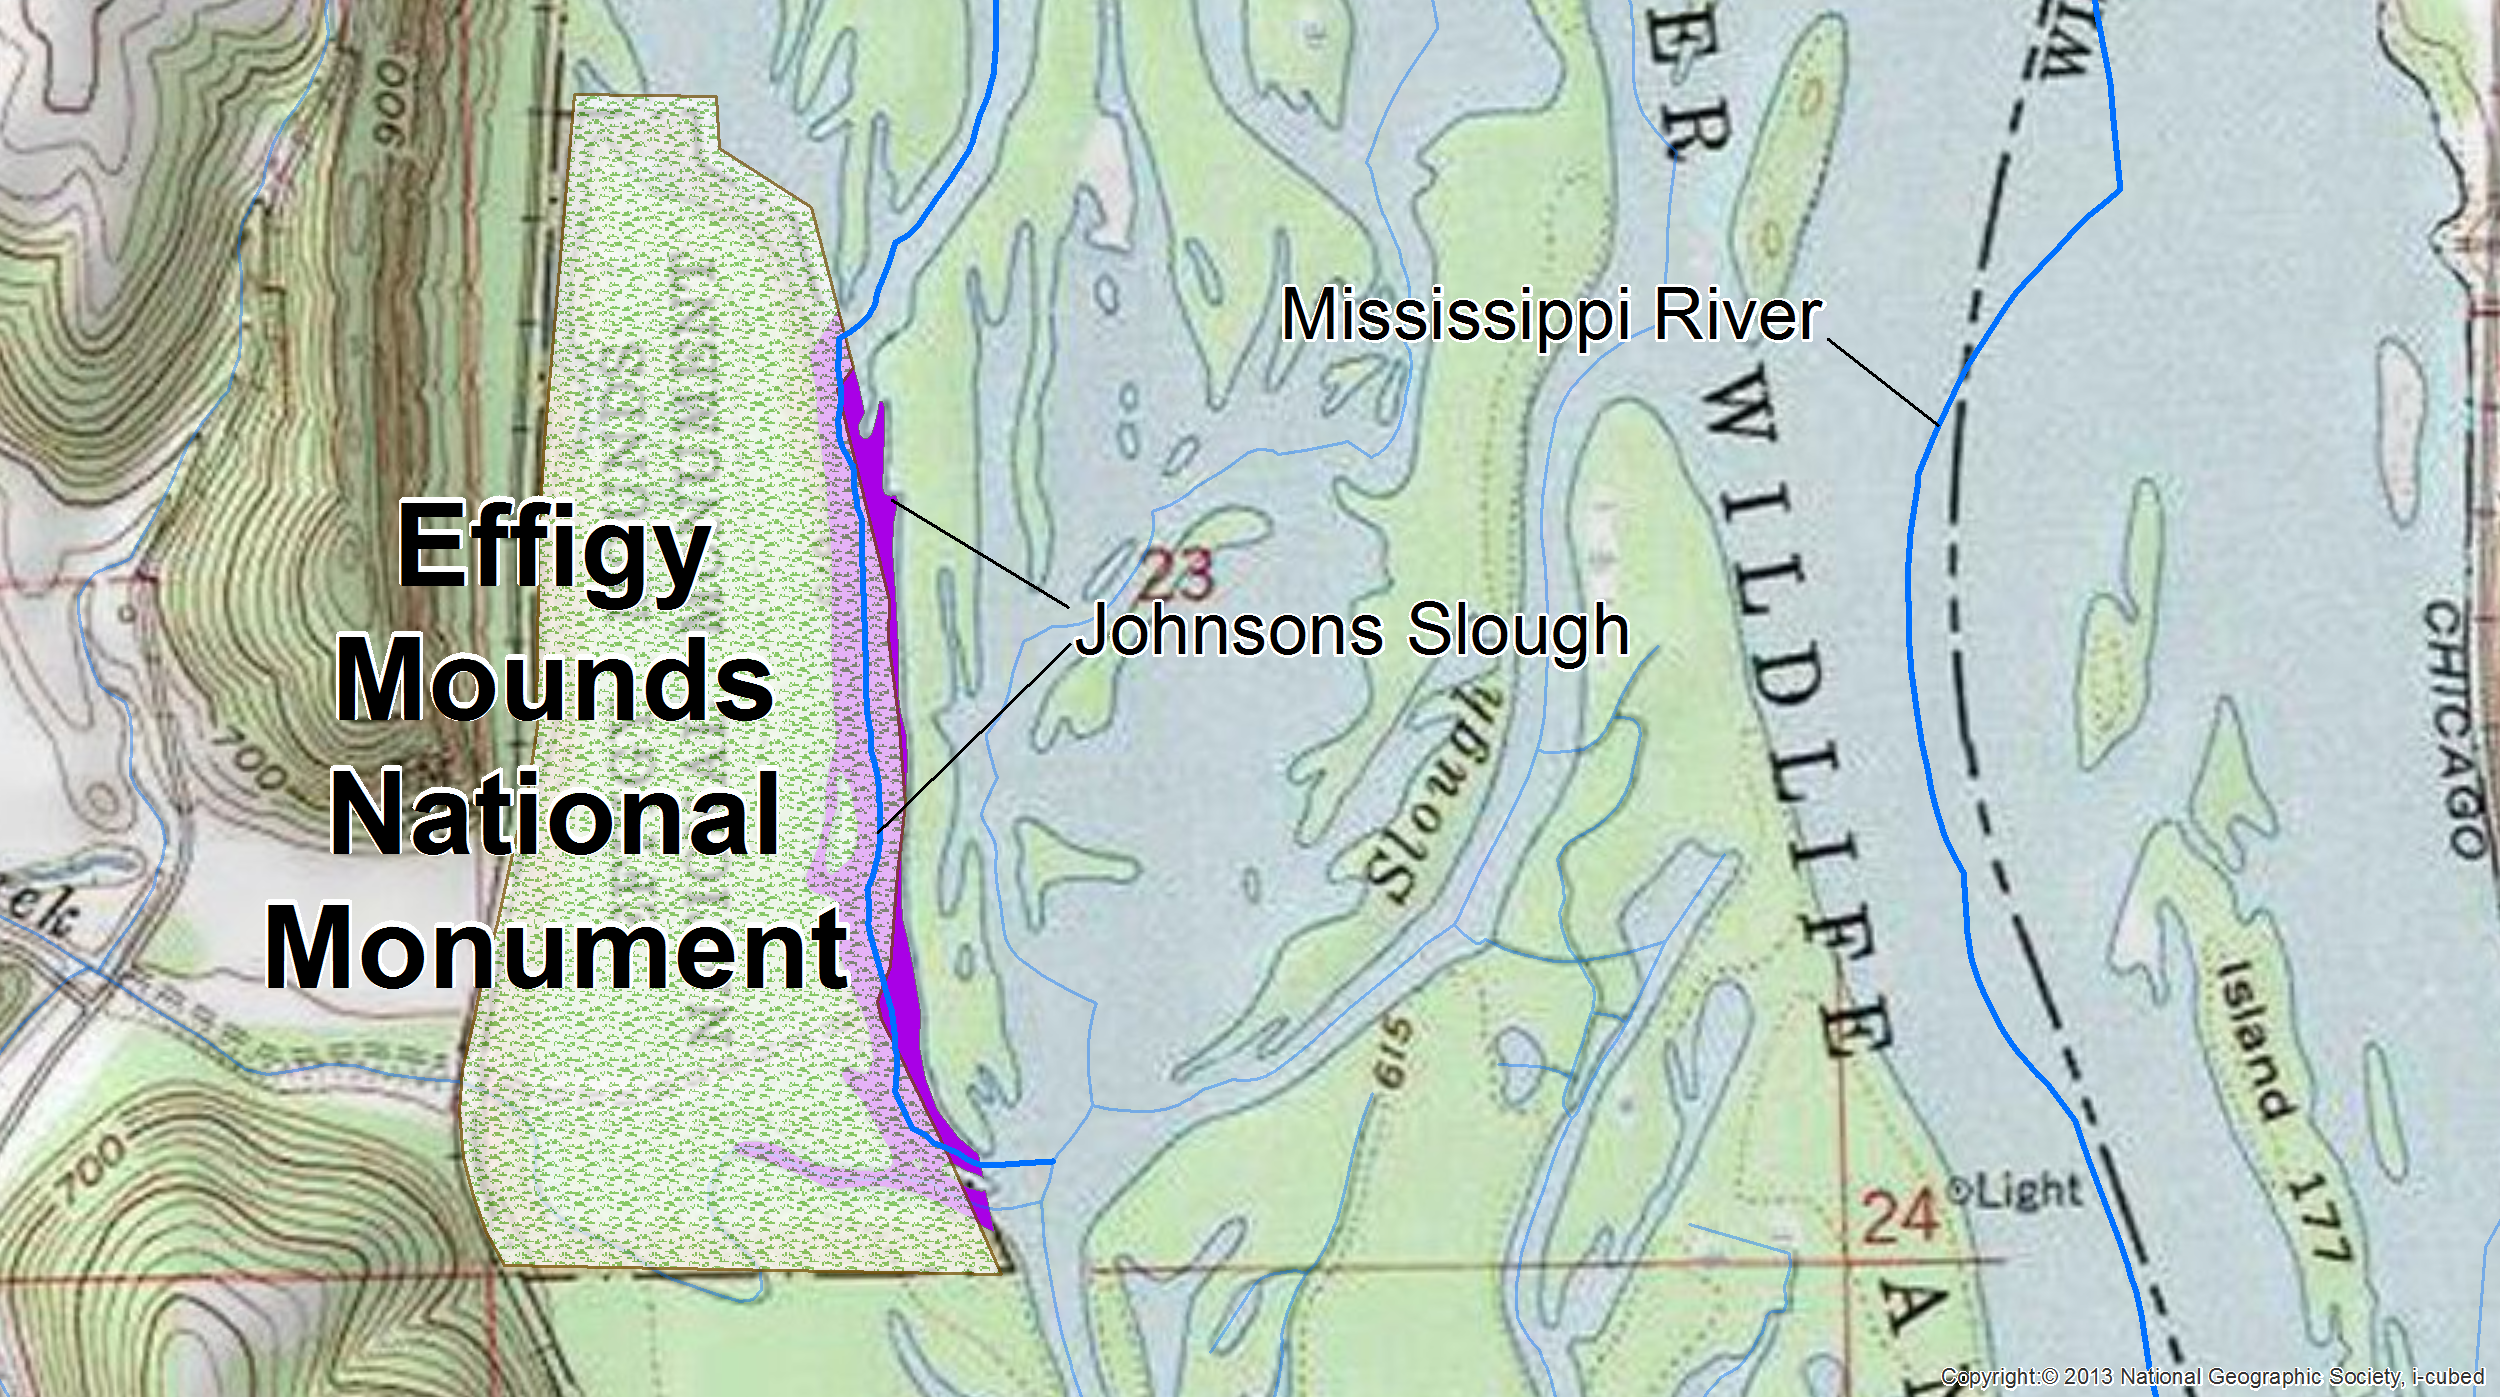 only the adjacent linear segment of Johnsons Slough and the purple areal polygon were attributed as adjacent in HIS.